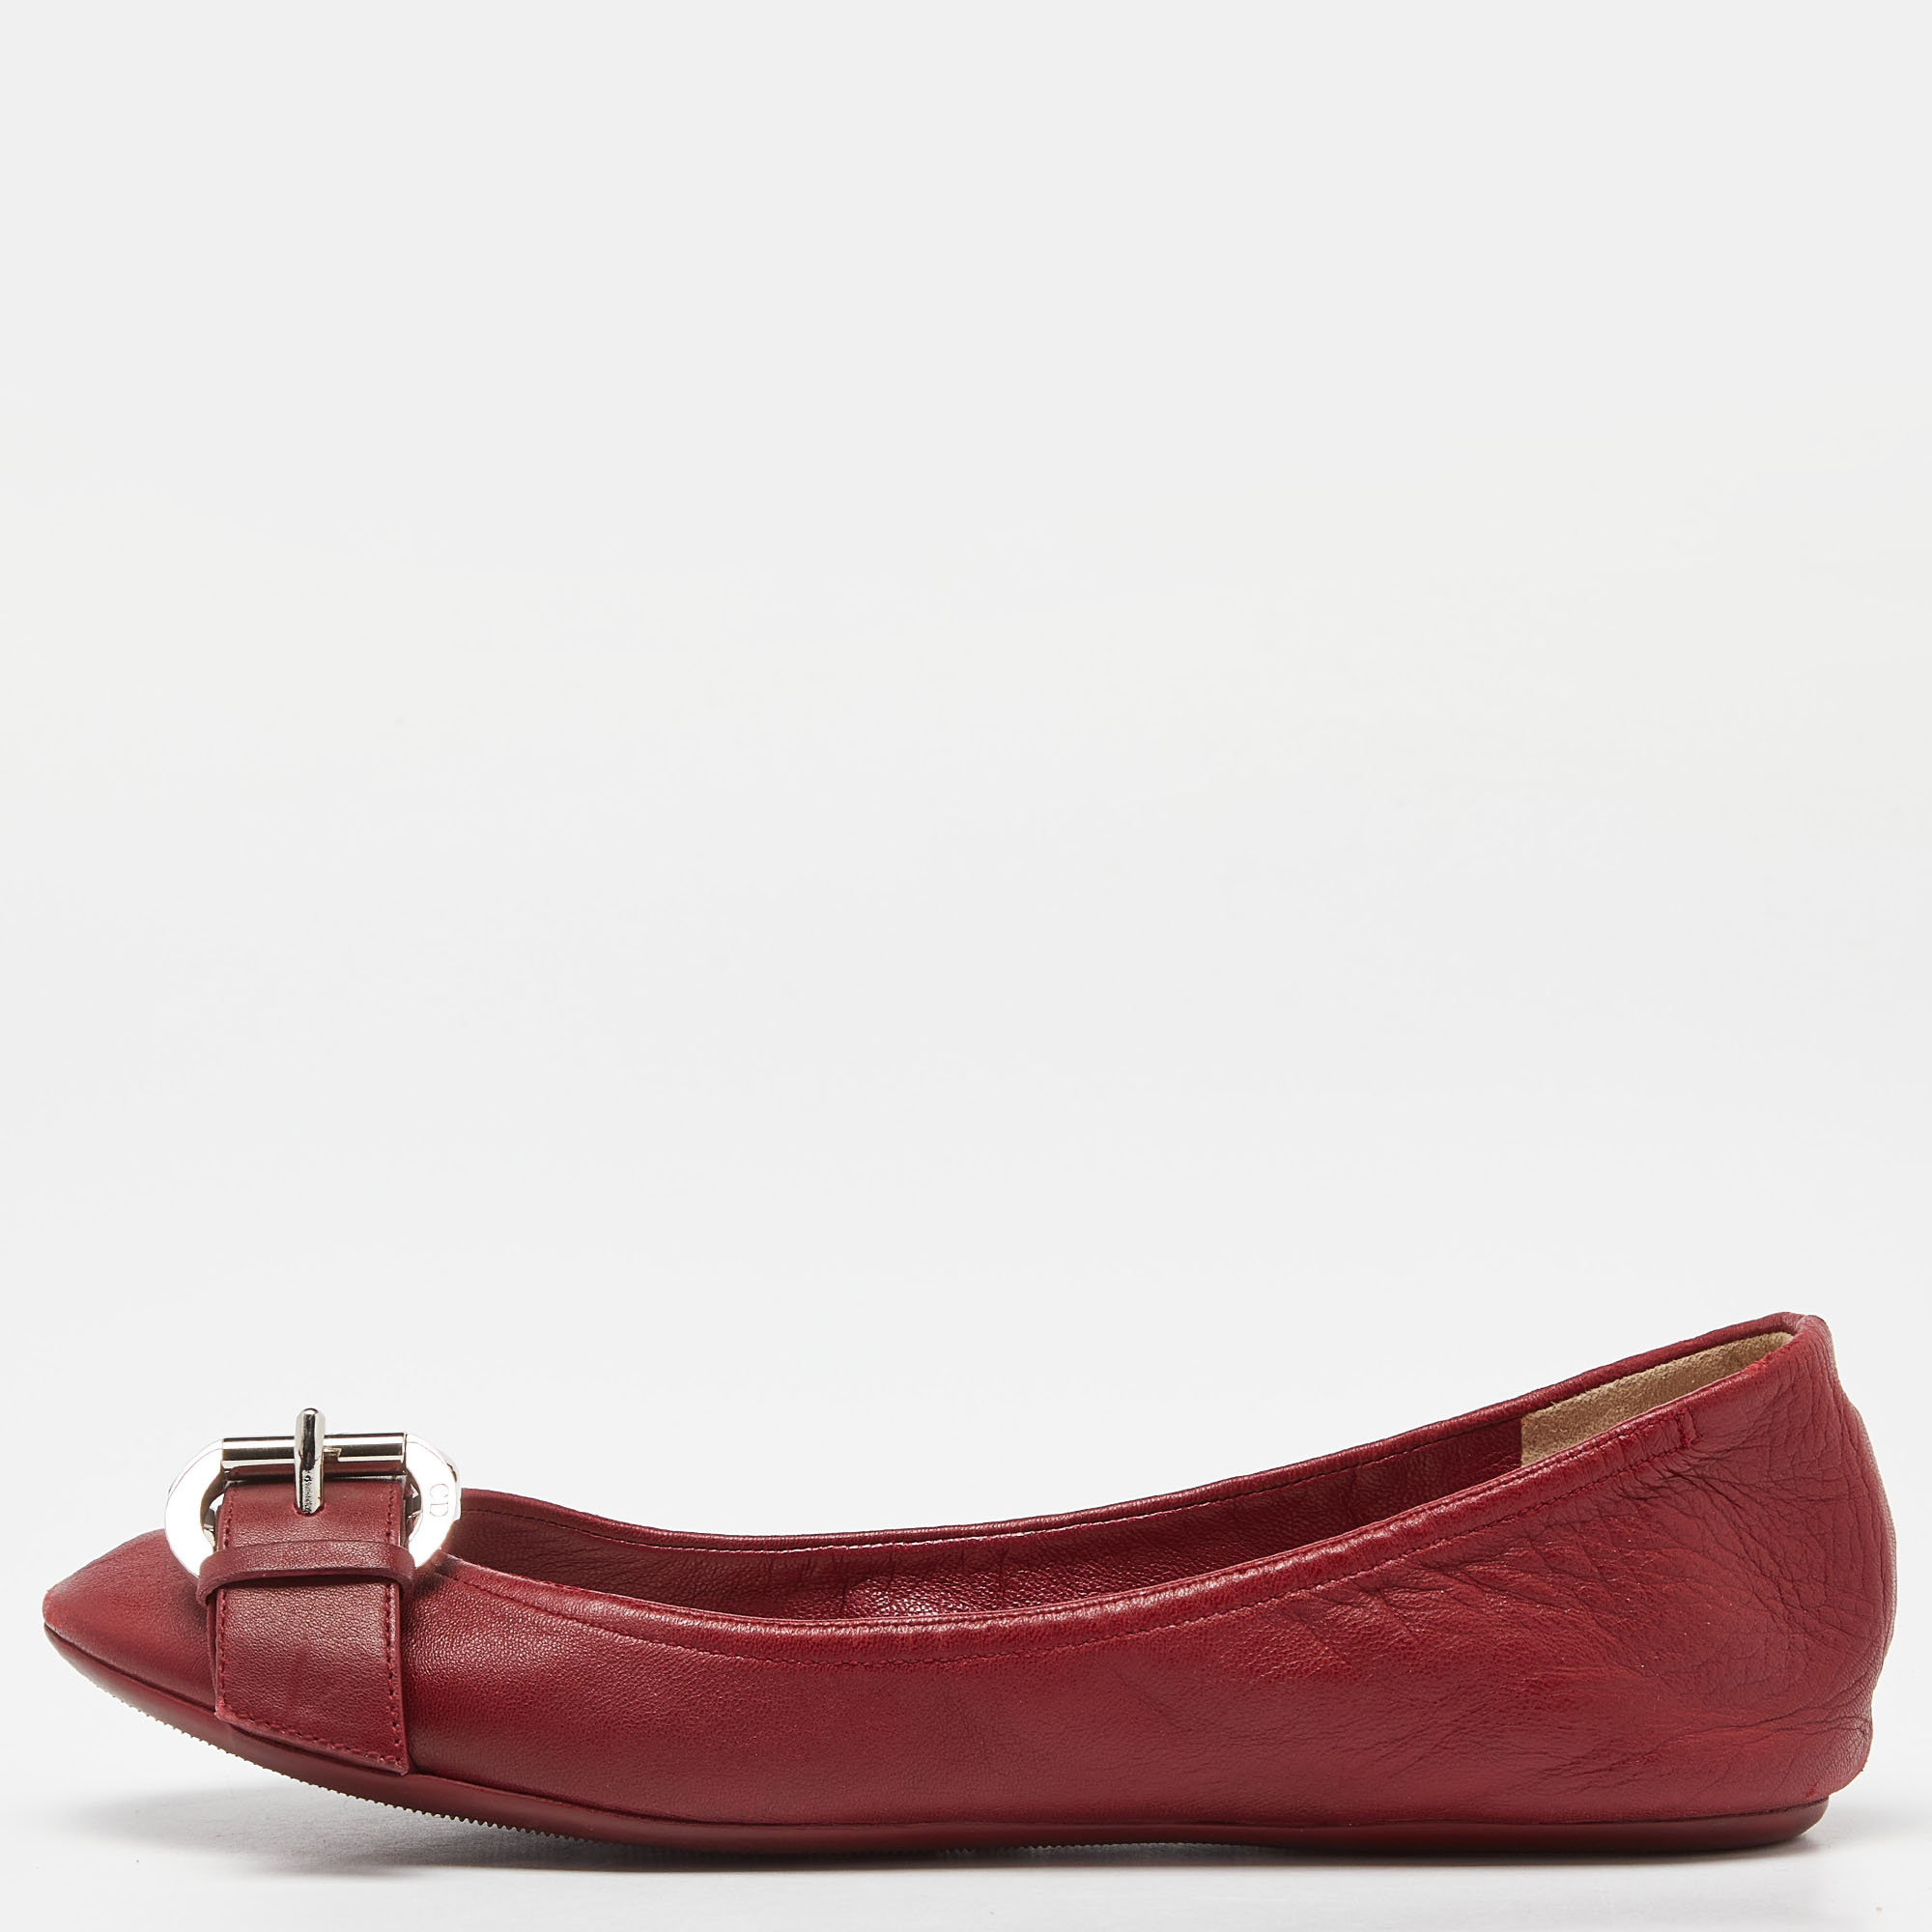 Dior red leather buckle ballet flats size 37